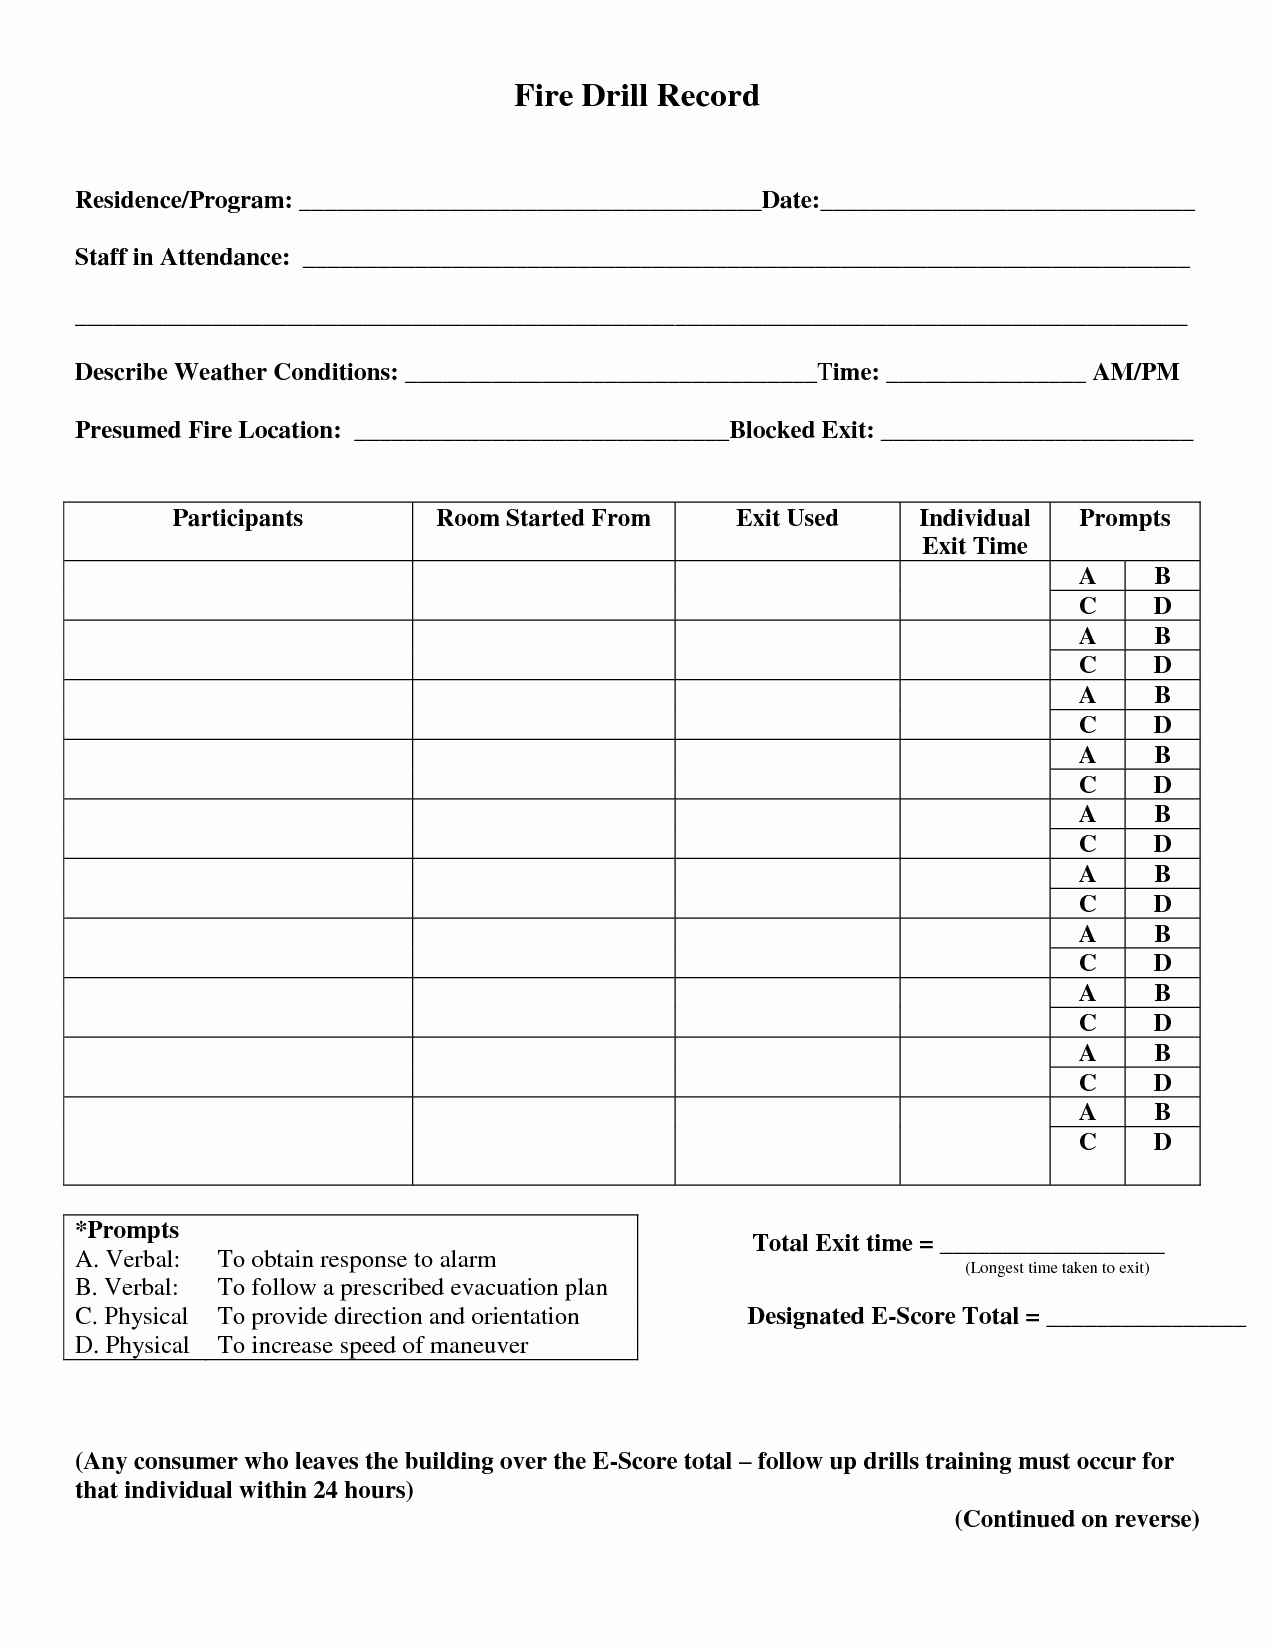 Fire Drill Report Sample Elegant Best S Of Record Emergency Evacuation Drills